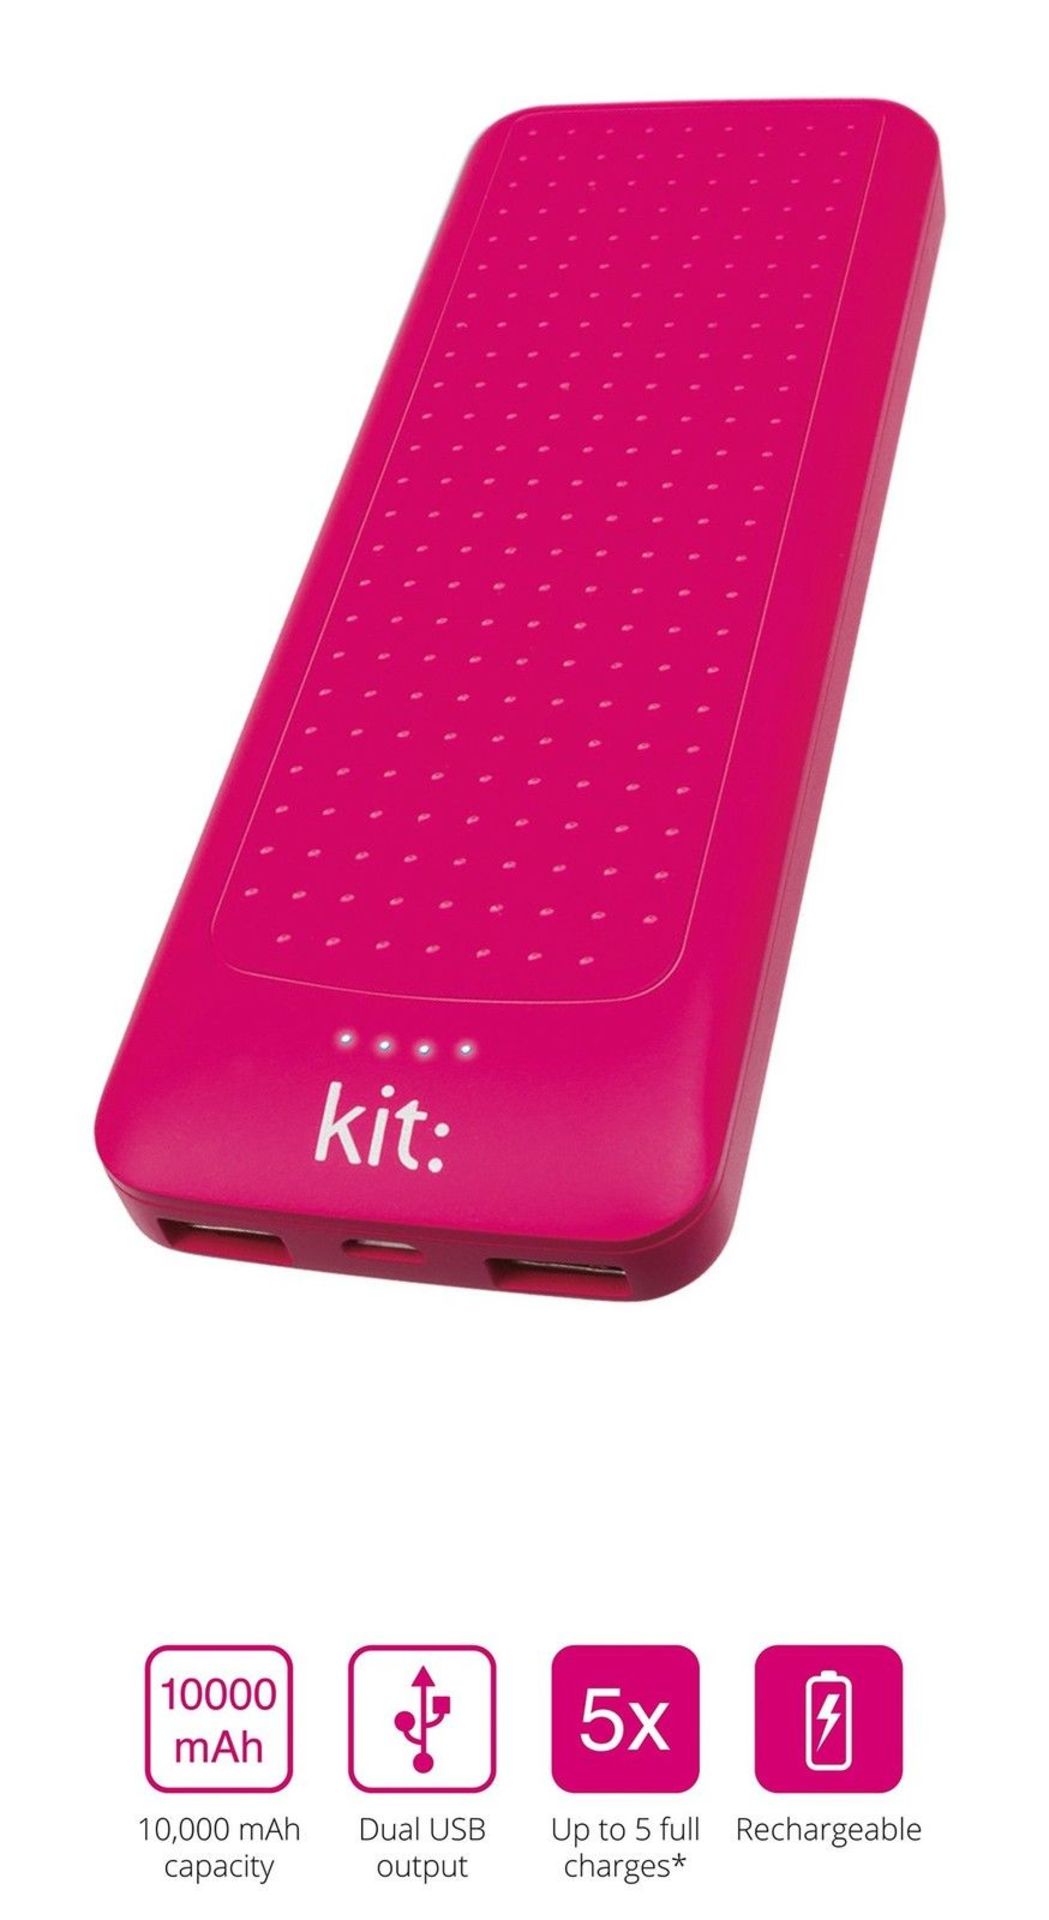 V *TRADE QTY* Brand New Kit Essentials 10000mAh Universal Power Bank with Two USB Ports - Pink -